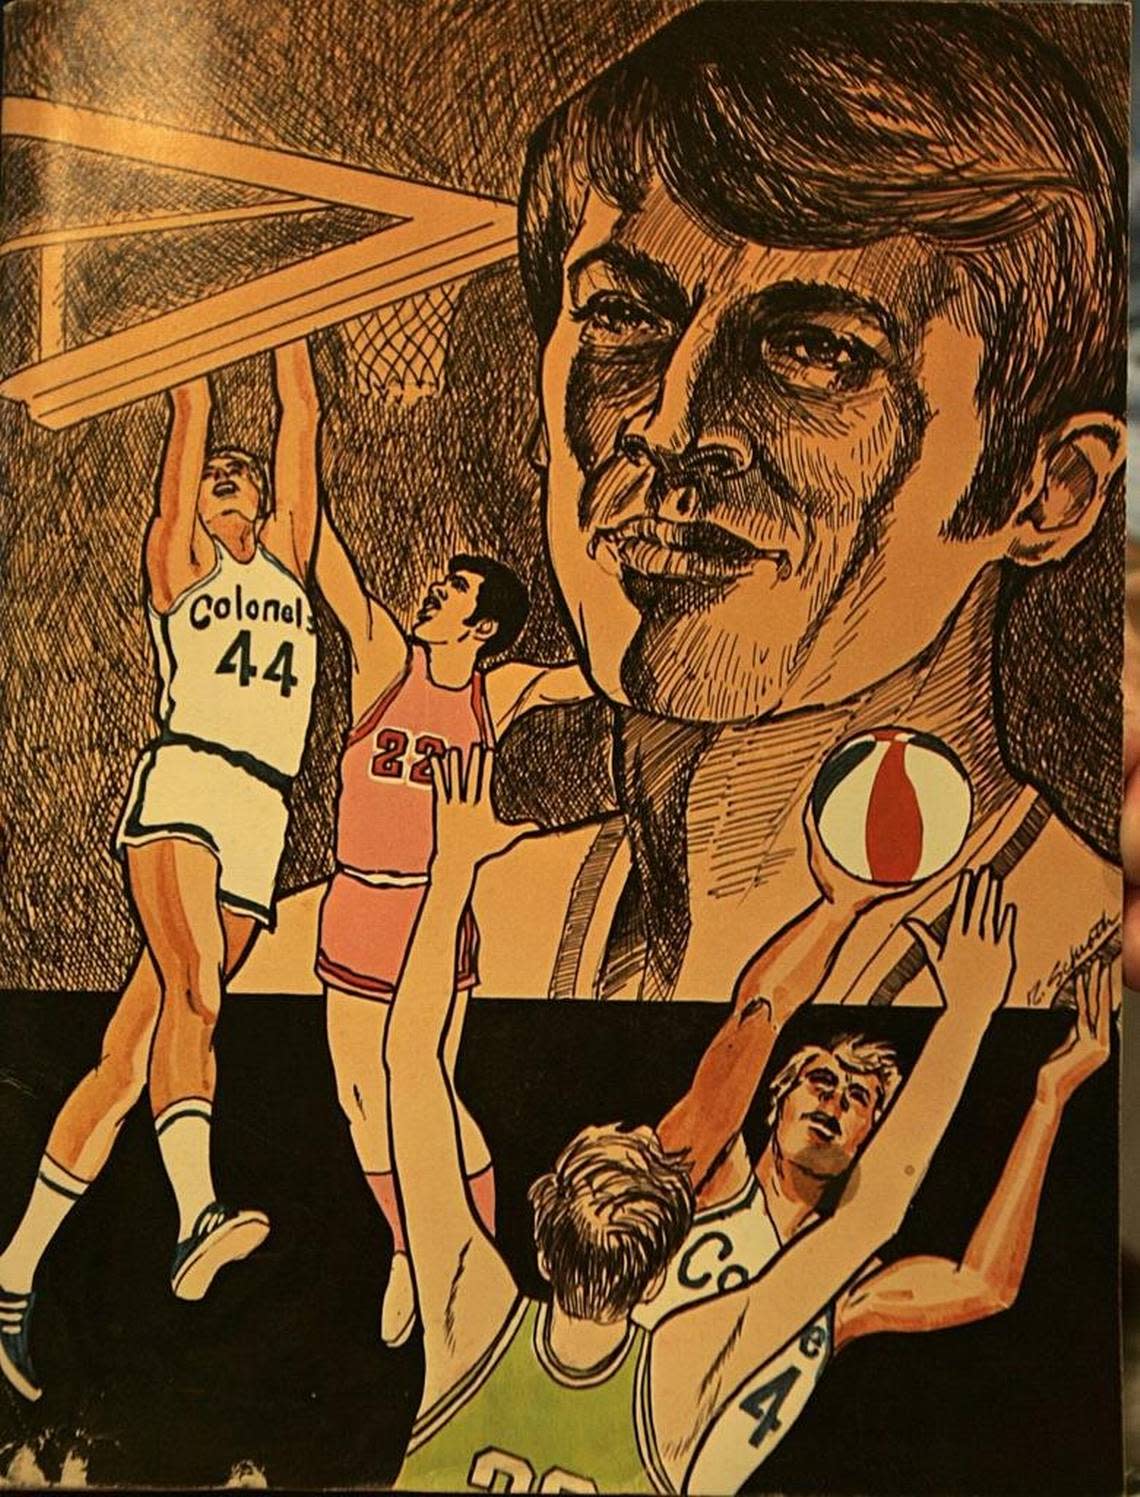 A game program from the old Kentucky Colonels of the ABA with Dan Issel on the cover.